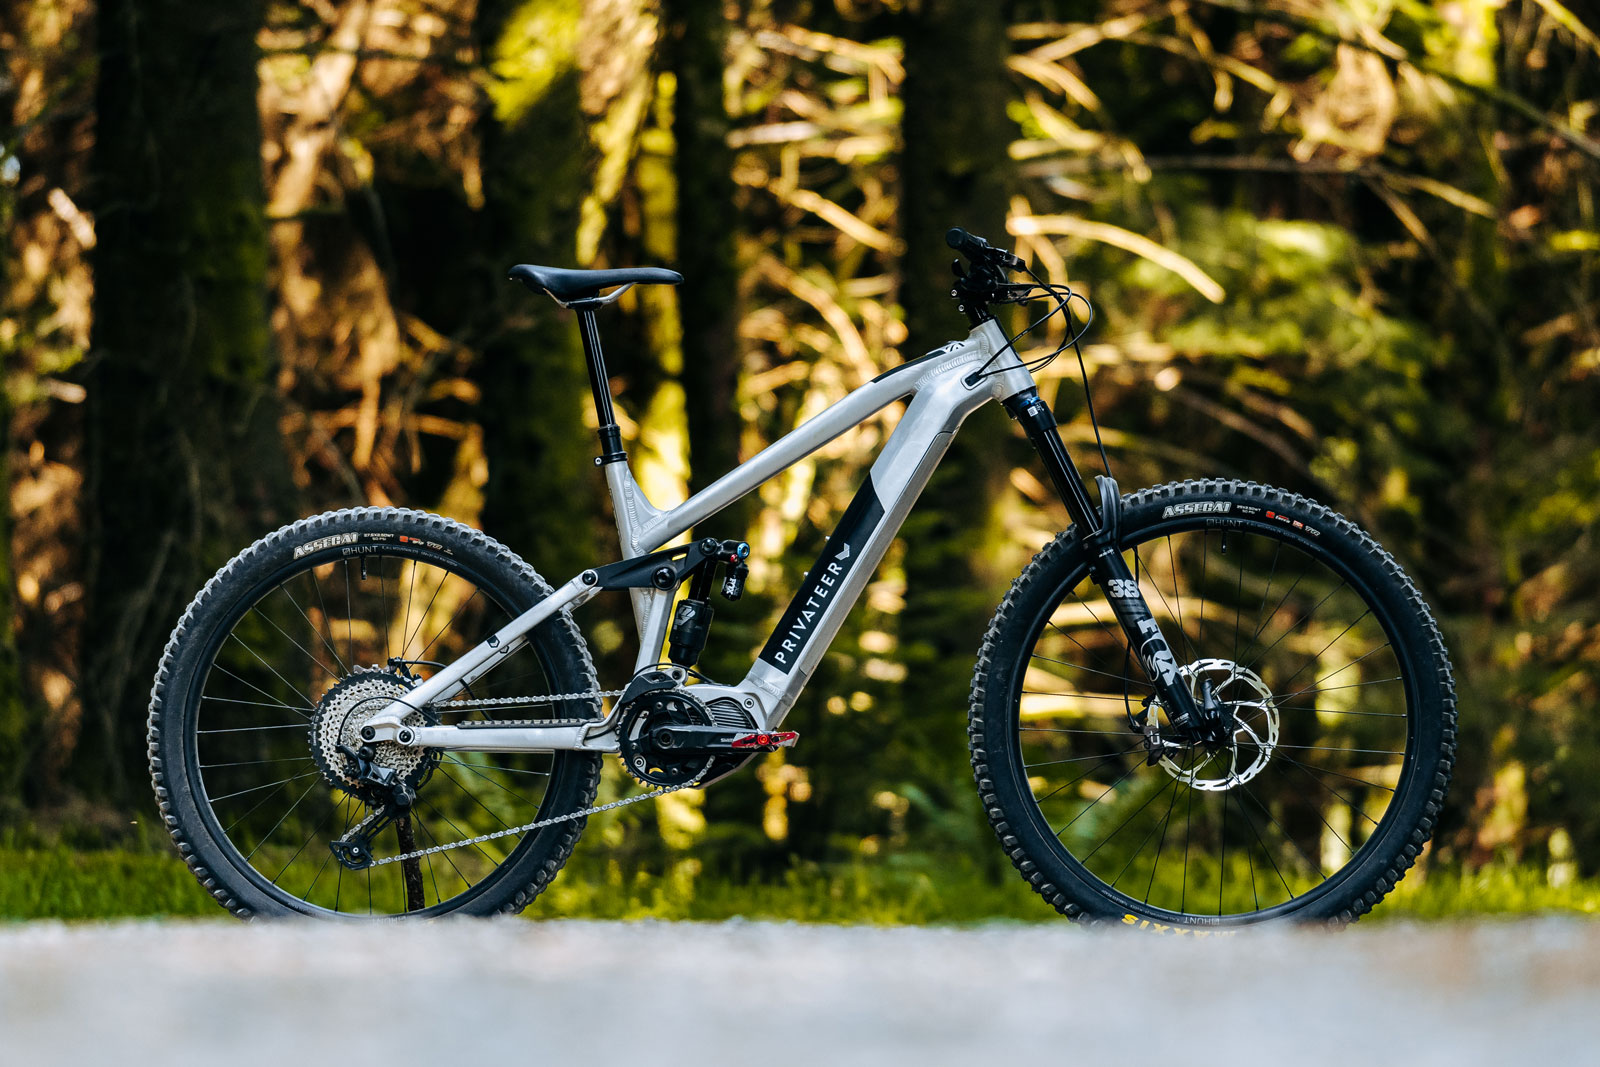 Privateer e161 is a New Well-Priced Enduro eBike